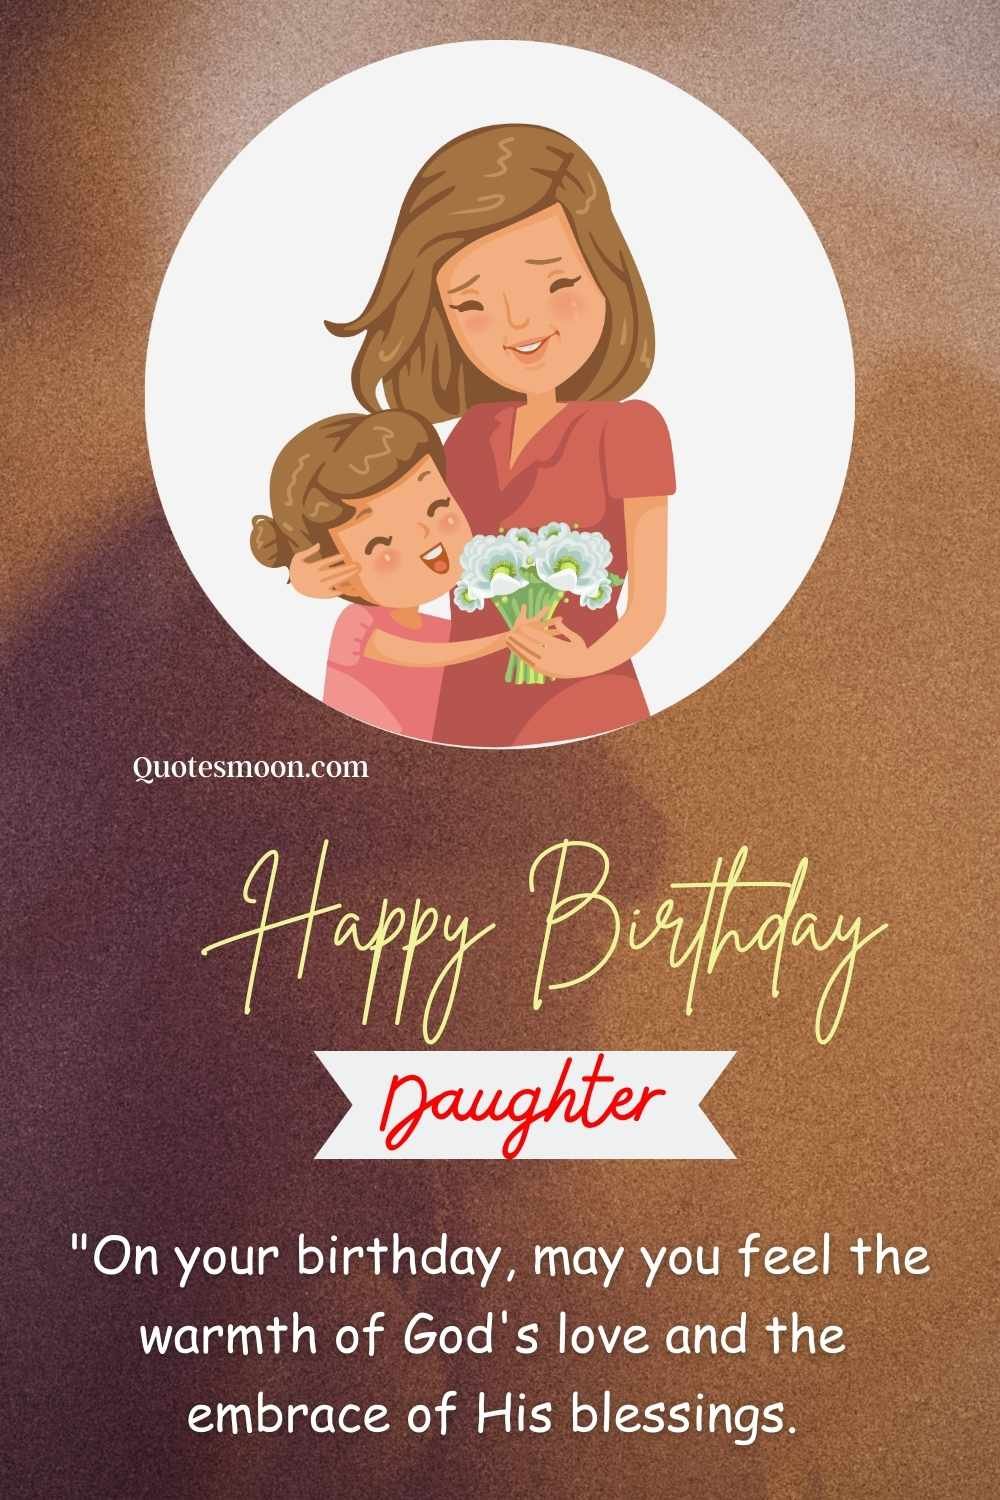 Unforgettable Happy Birthday Wishes Images for Daughter